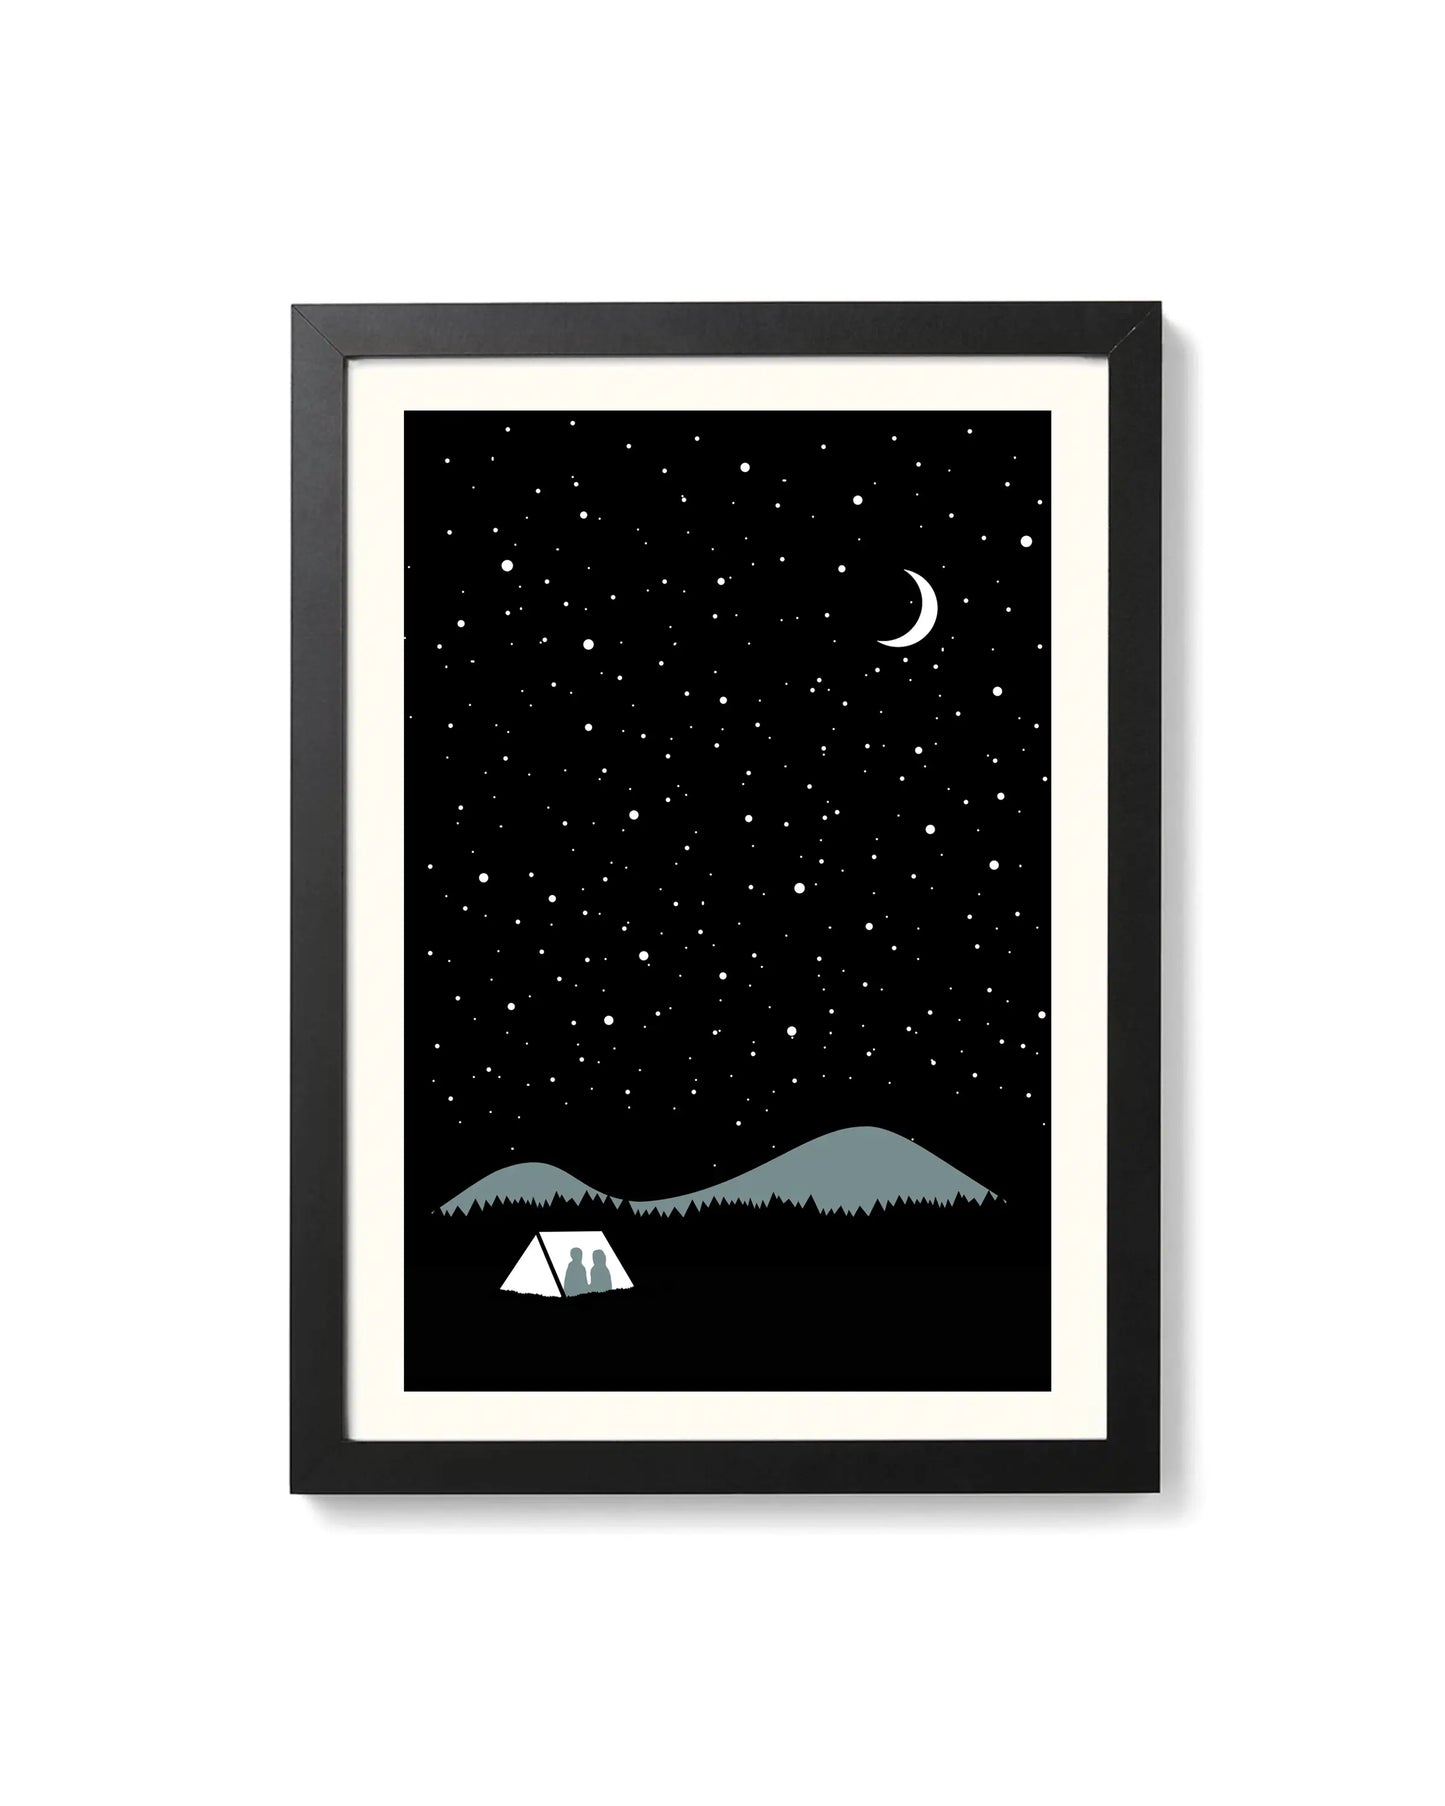 Lost In The Stars Print - A4